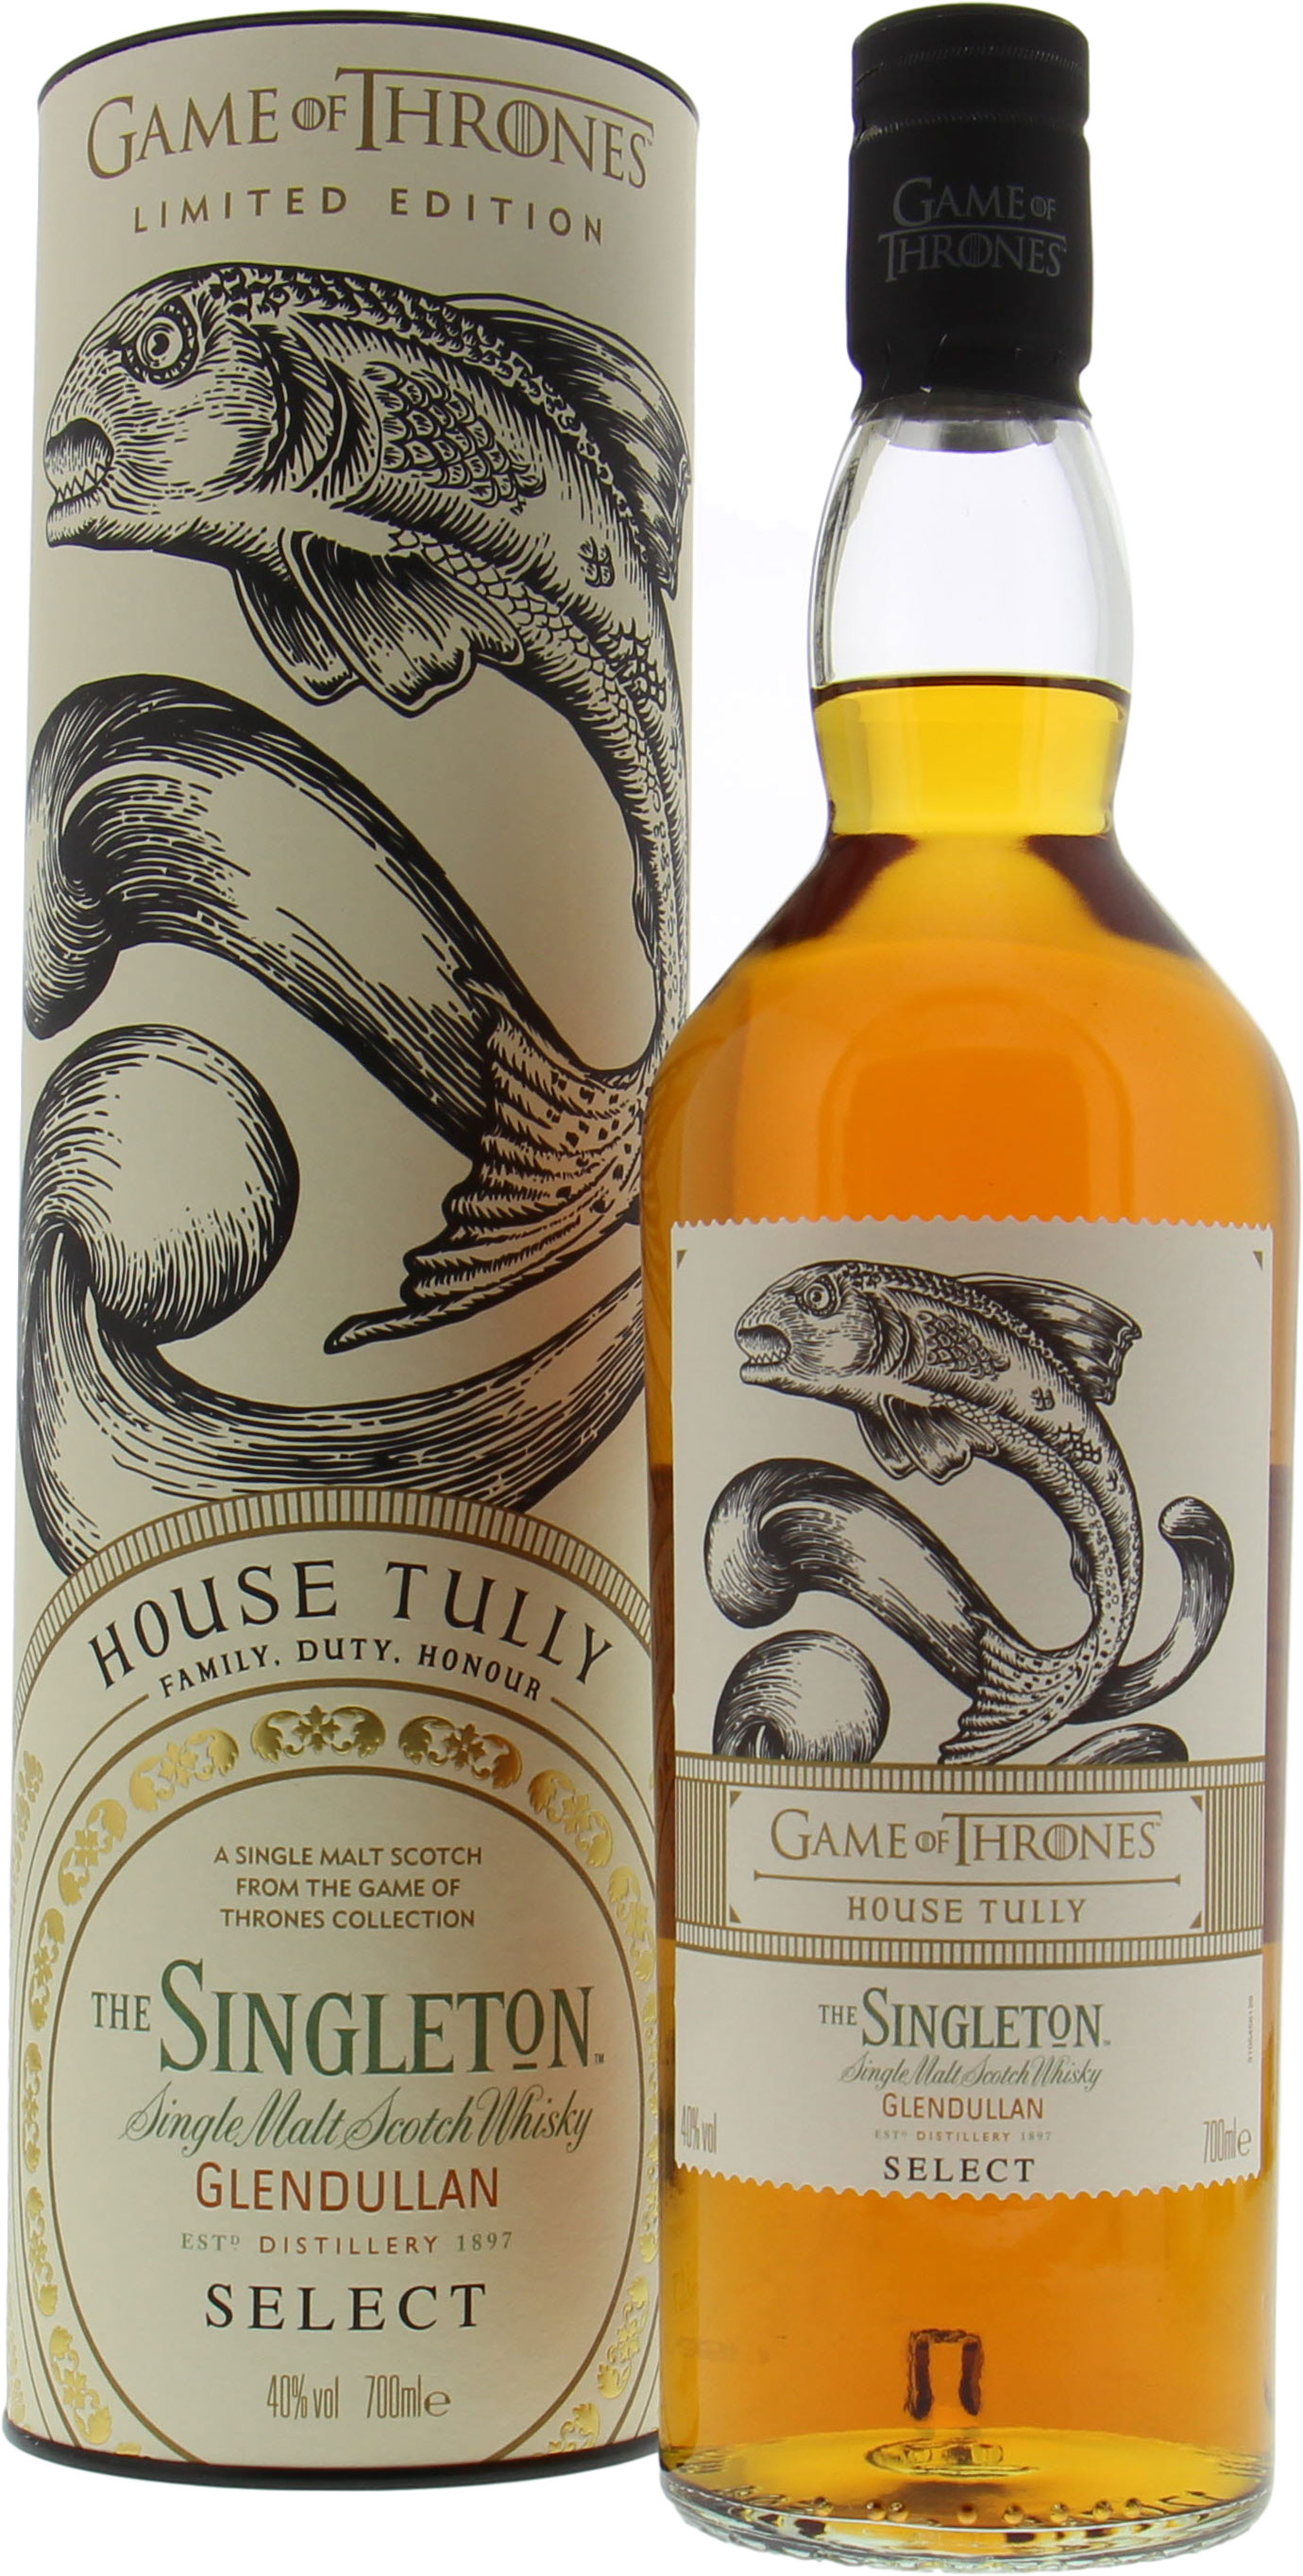 Glendullan - Game of Thrones House Tully 40% NV In Original Container